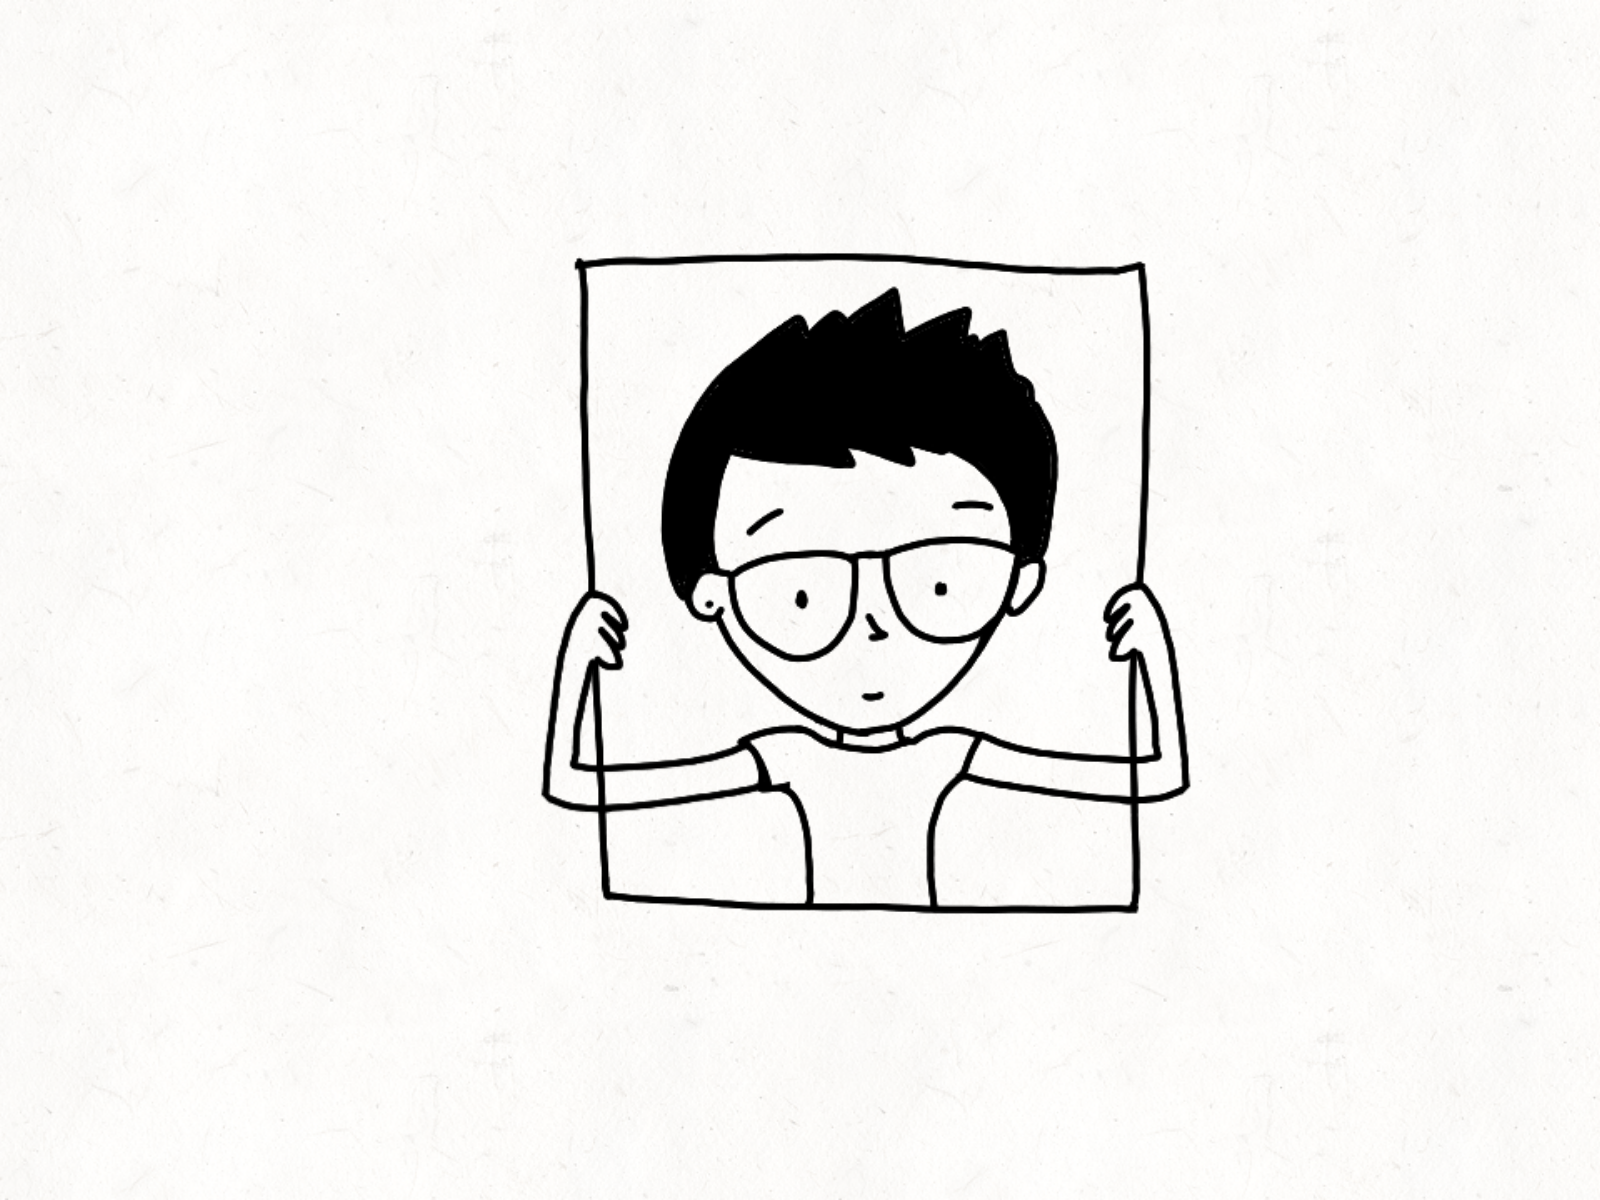 "Say cheese!" or just smile. animation design flipaclip frame by frame hand drawn illustration shy smile